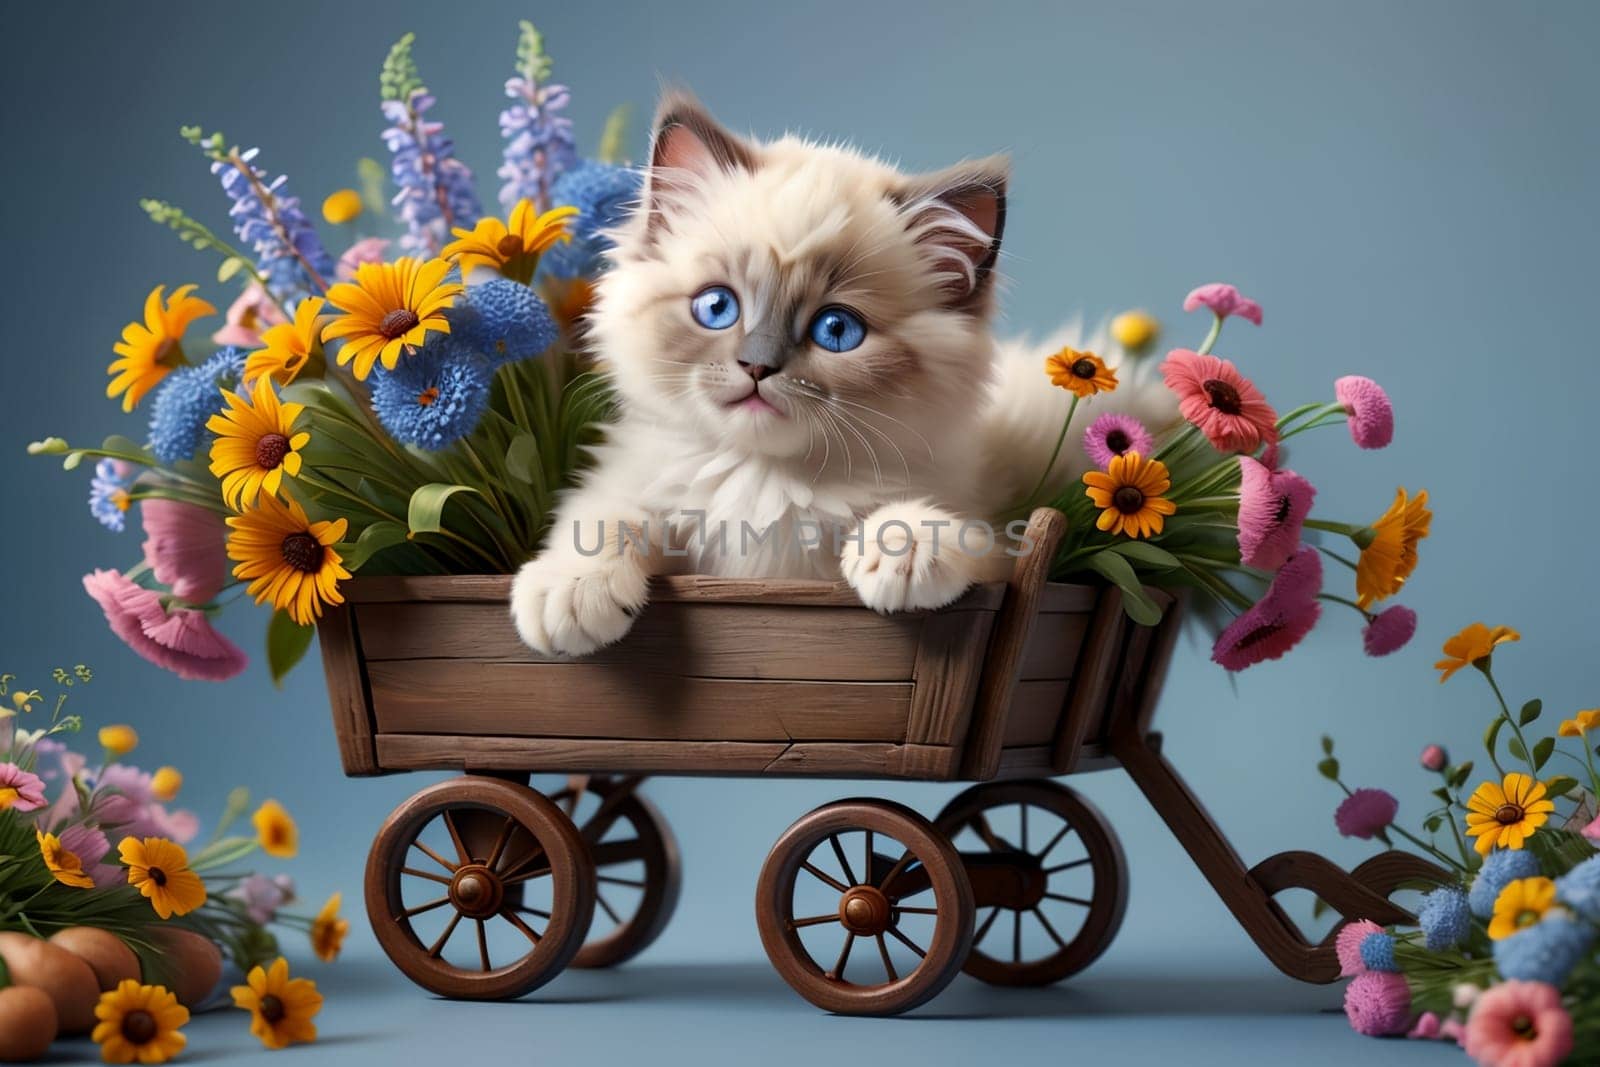 Cute kitten with a large bouquet of flowers in a cart by Rawlik